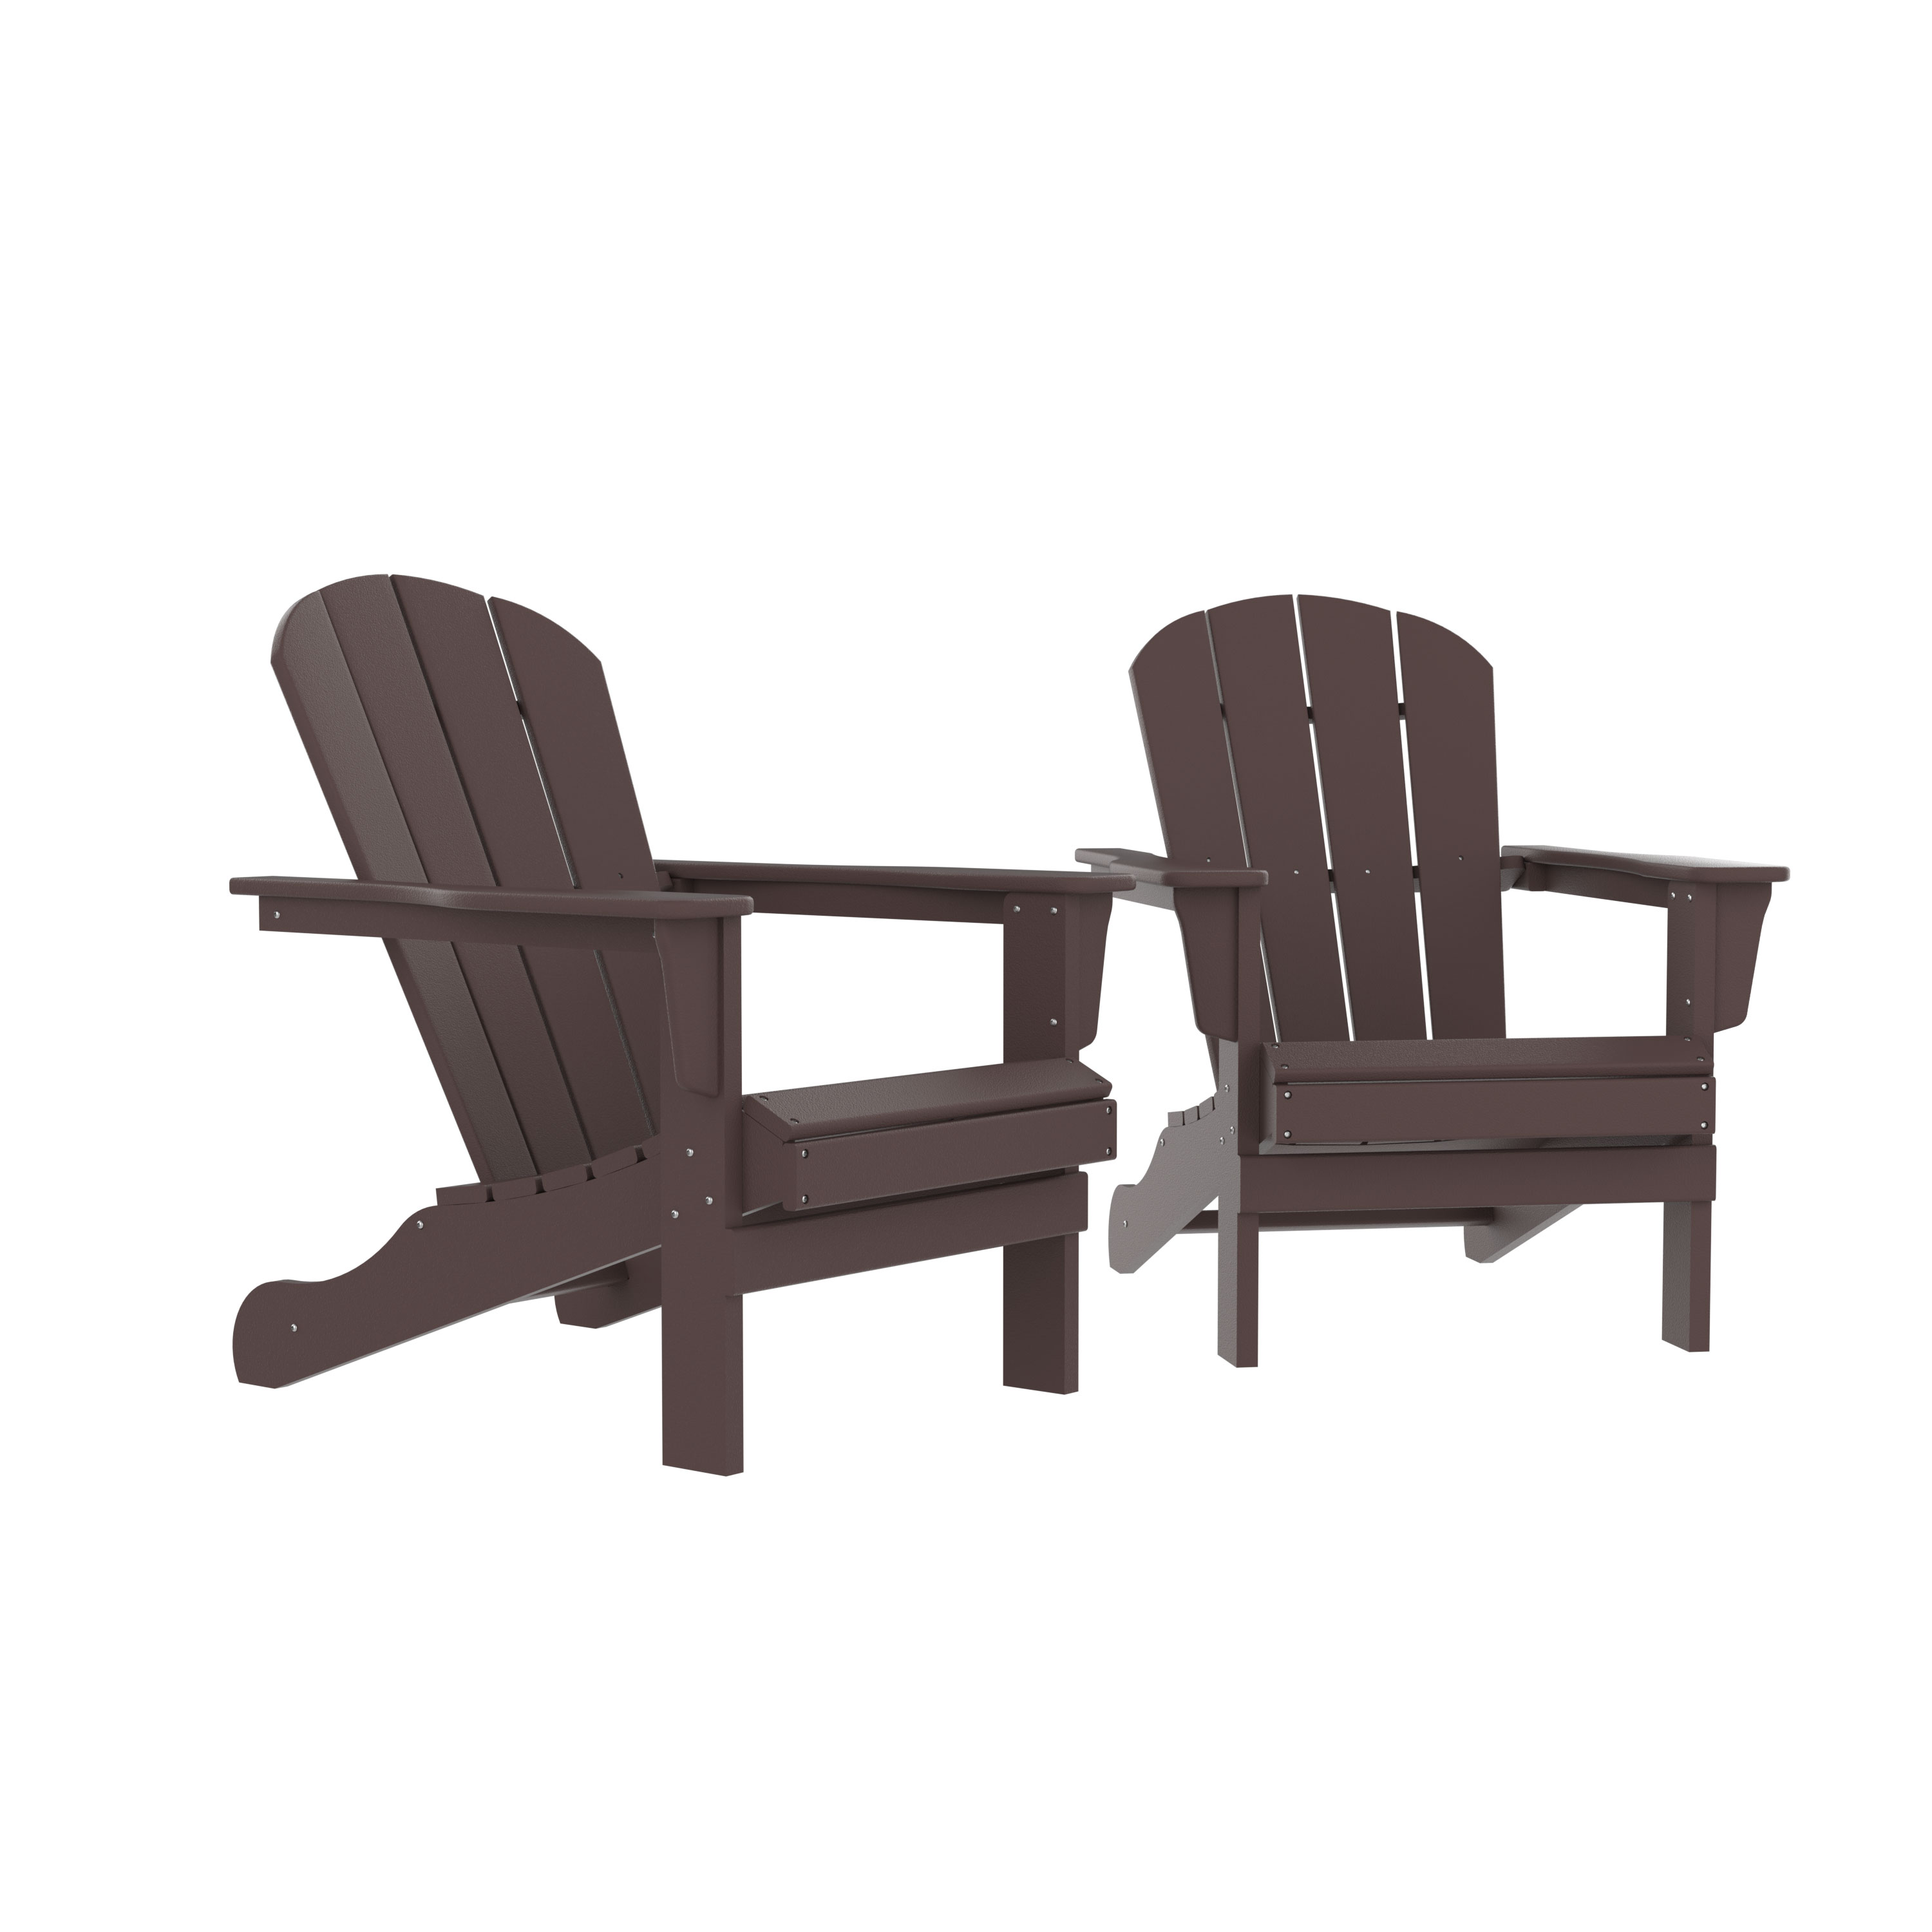 Hottest HDPE Adirondack Chair, Fire Pit Chairs, Sand Chair, Patio Outdoor Chairs,DPE Plastic Resin Deck Chair, lawn chairs, Adult Size ,Weather Resistant for Patio/ Backyard/Garden , Brown, Set of 2 - image 1 of 6